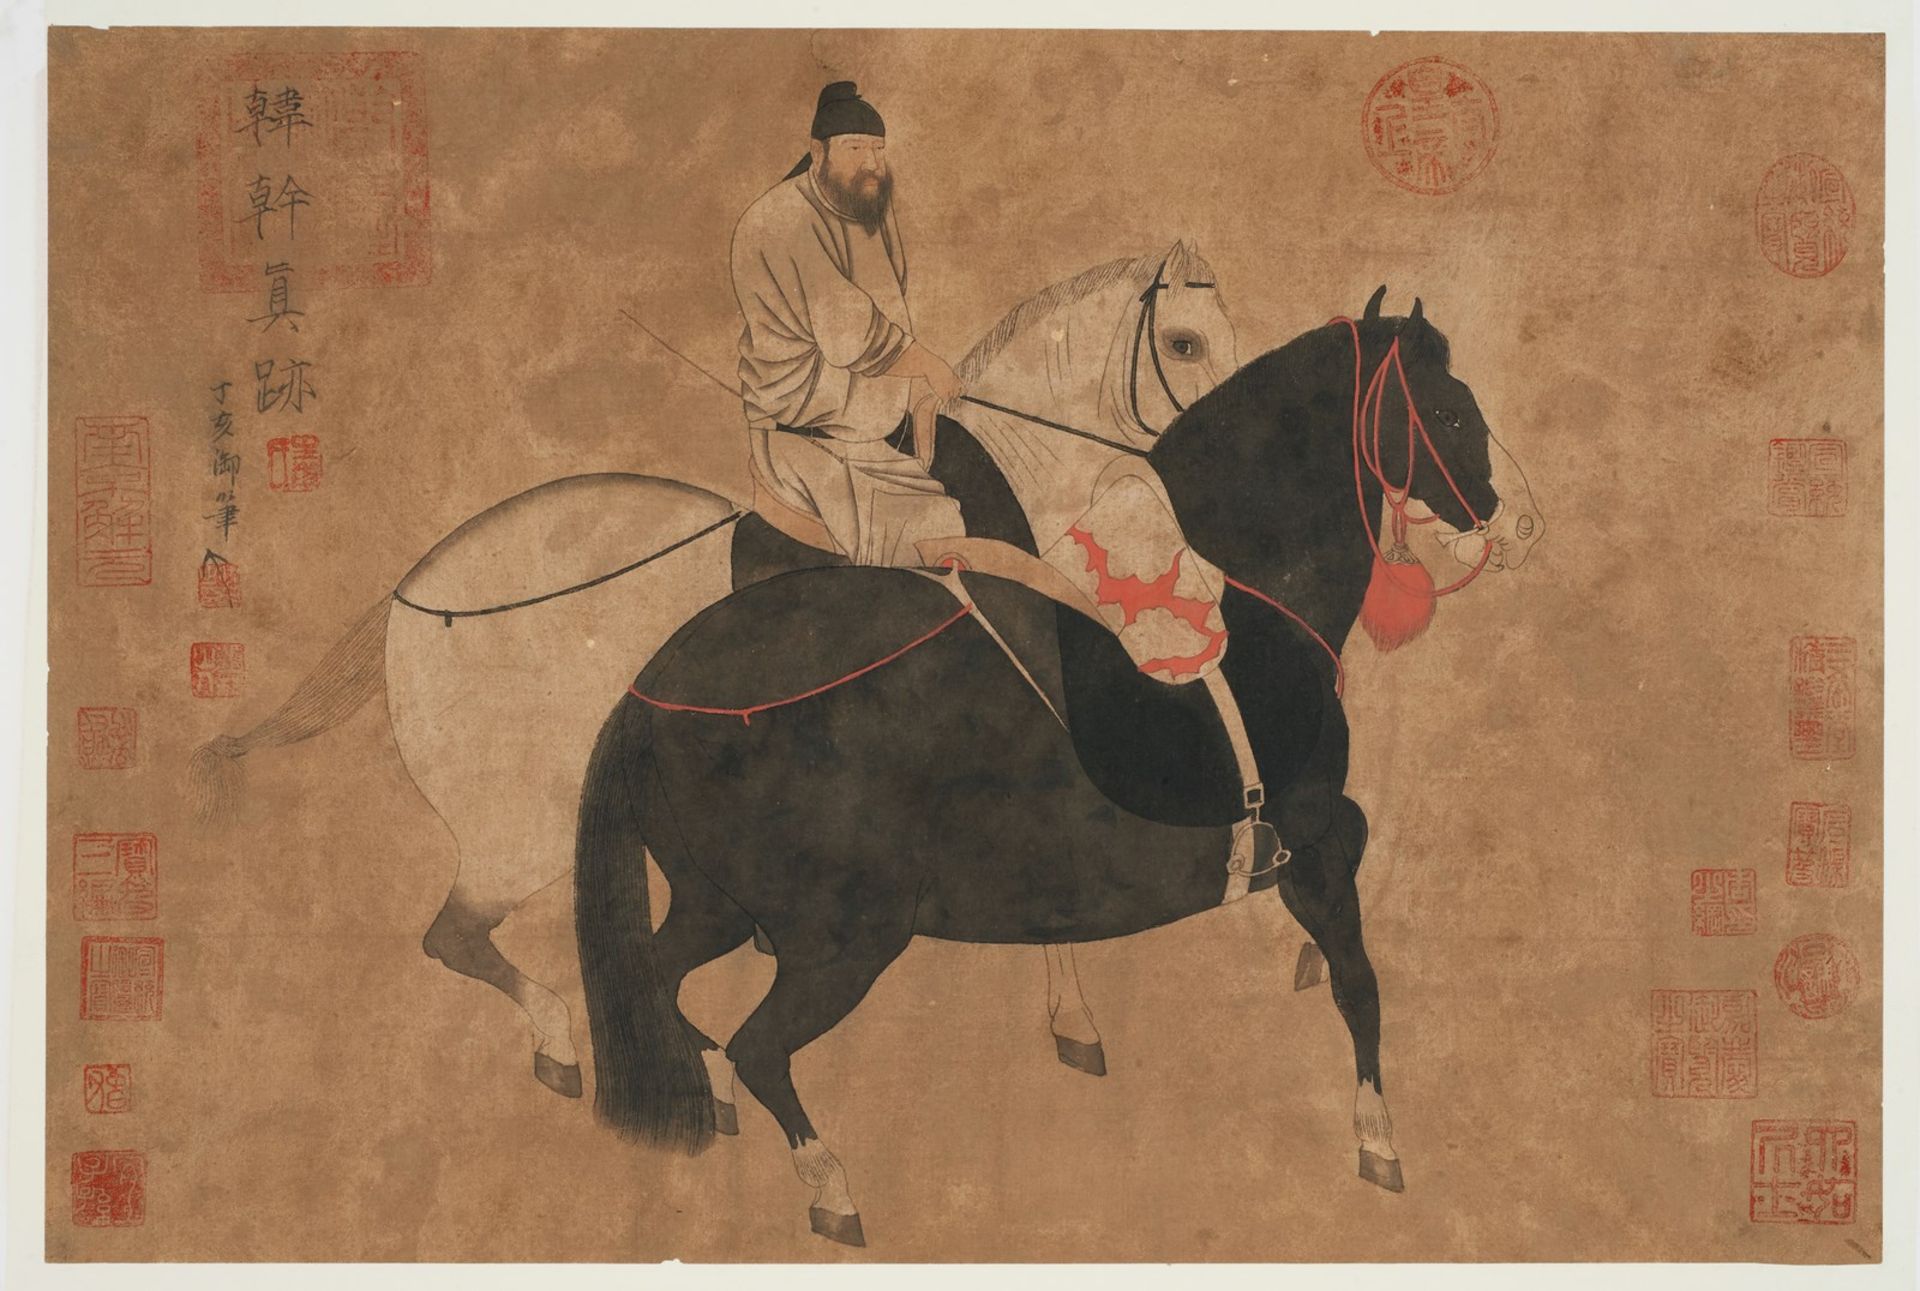 Arte Cinese A painting on paper depicting horses and groom China, possibly 15th century .